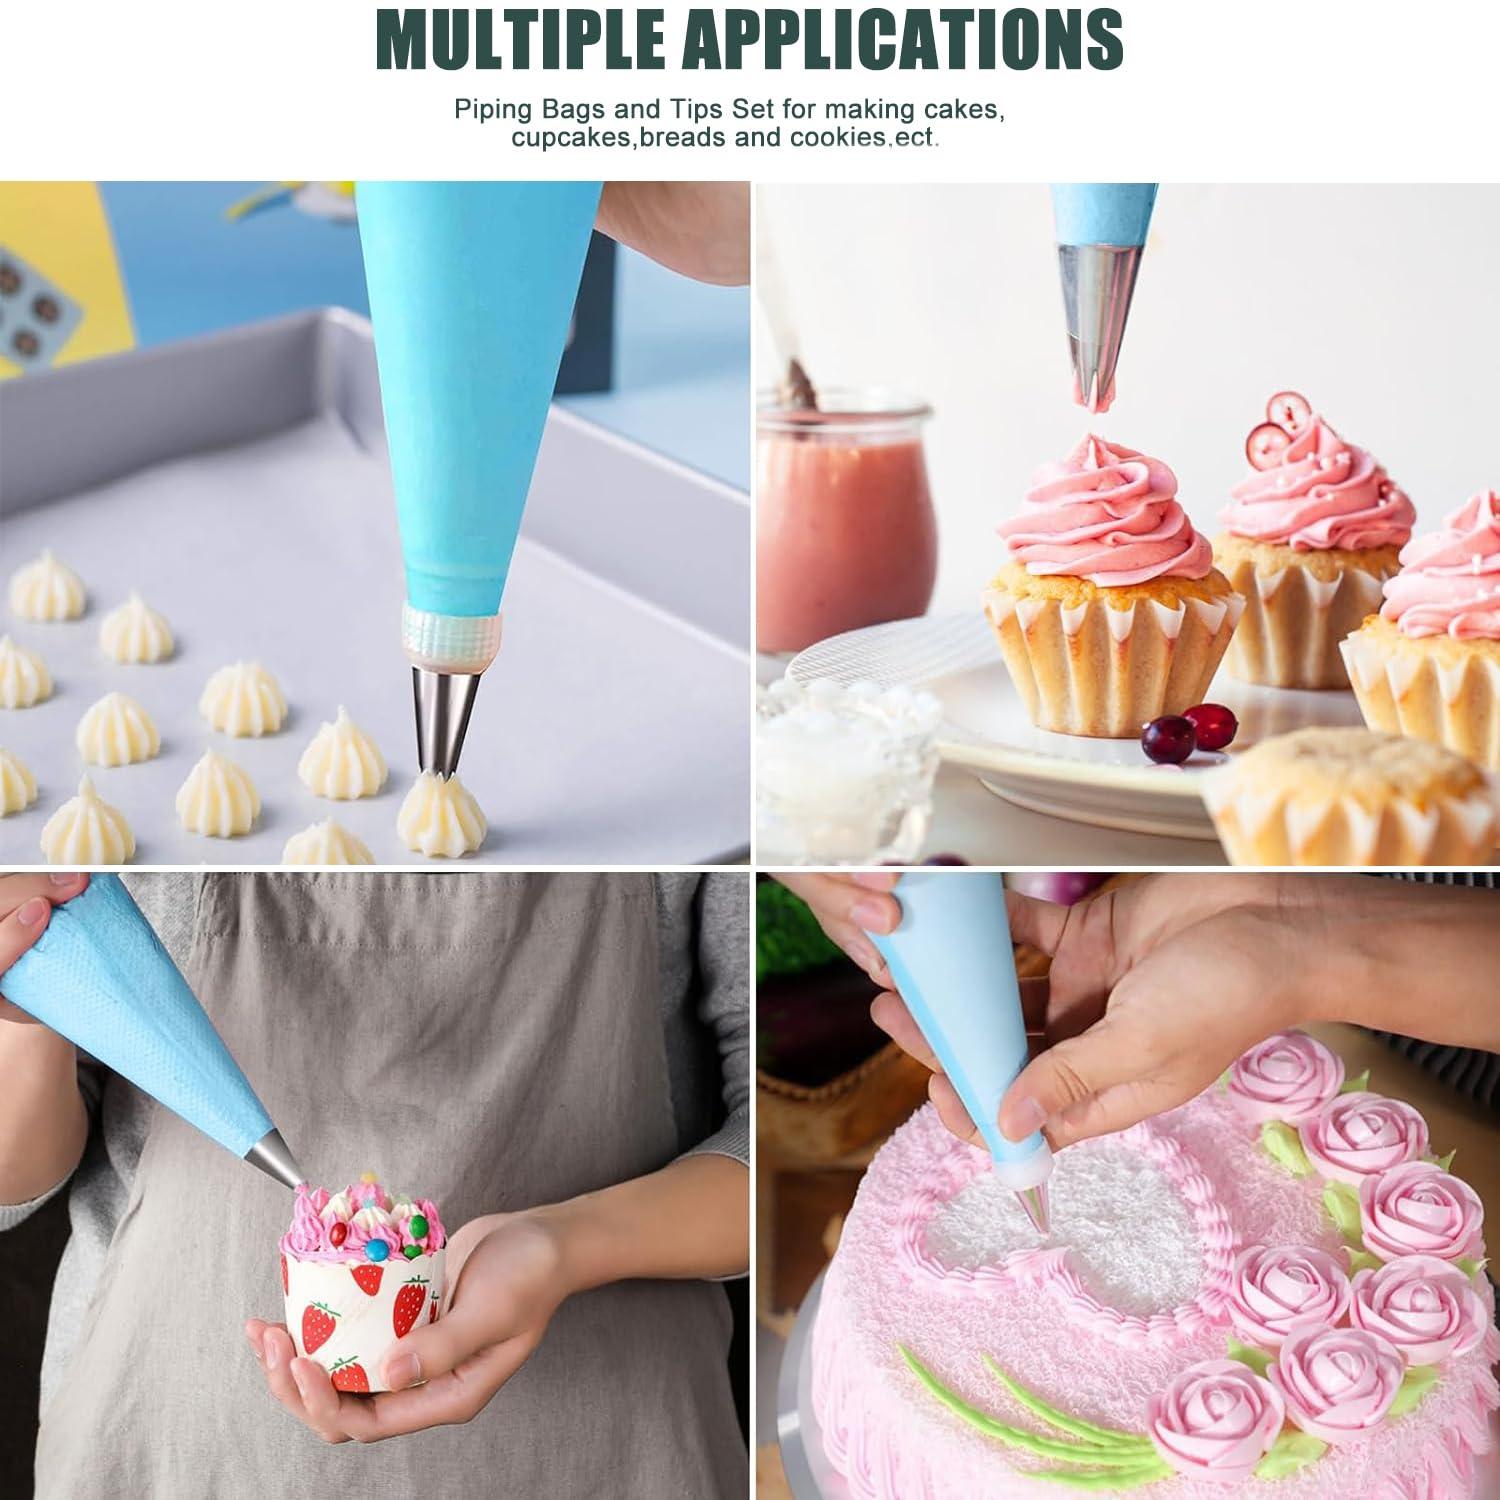 Reusable Piping Bag and Tip Set - Decorating Supplies with 2 Bags, 12 Tips, 2 Rings, 2 Couplers, 3 Scrapers - Cake Baking Tools for Icing Cookies Cupcakes - CookCave